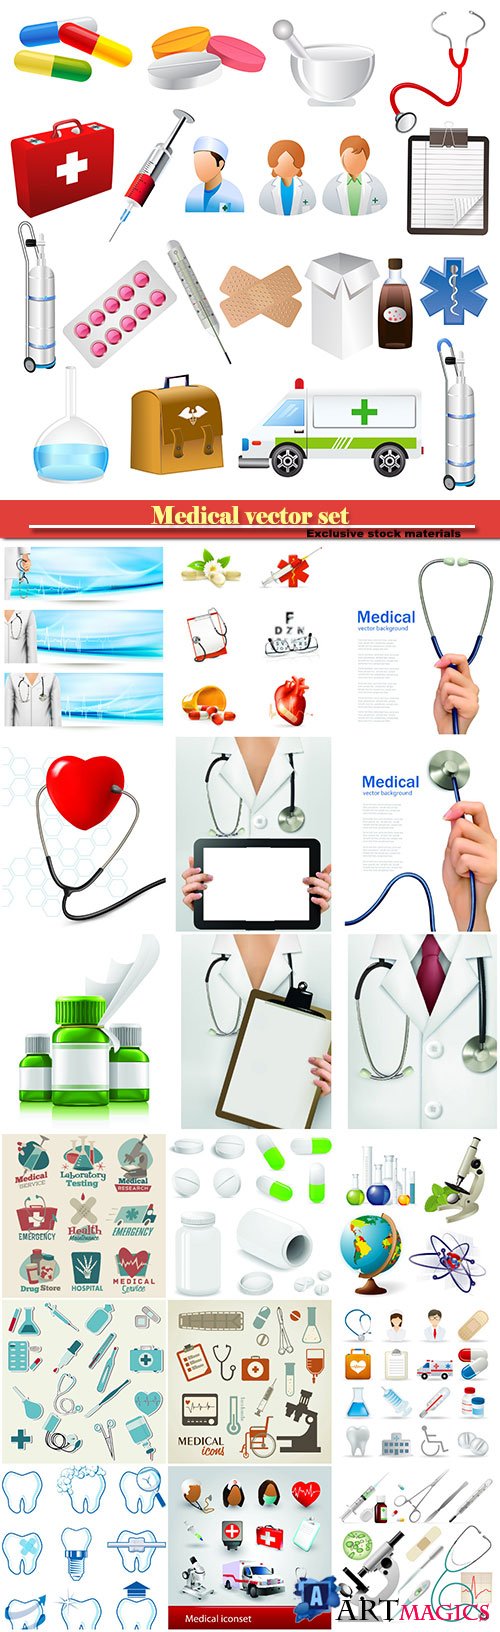 Medical vector set, icons and elements